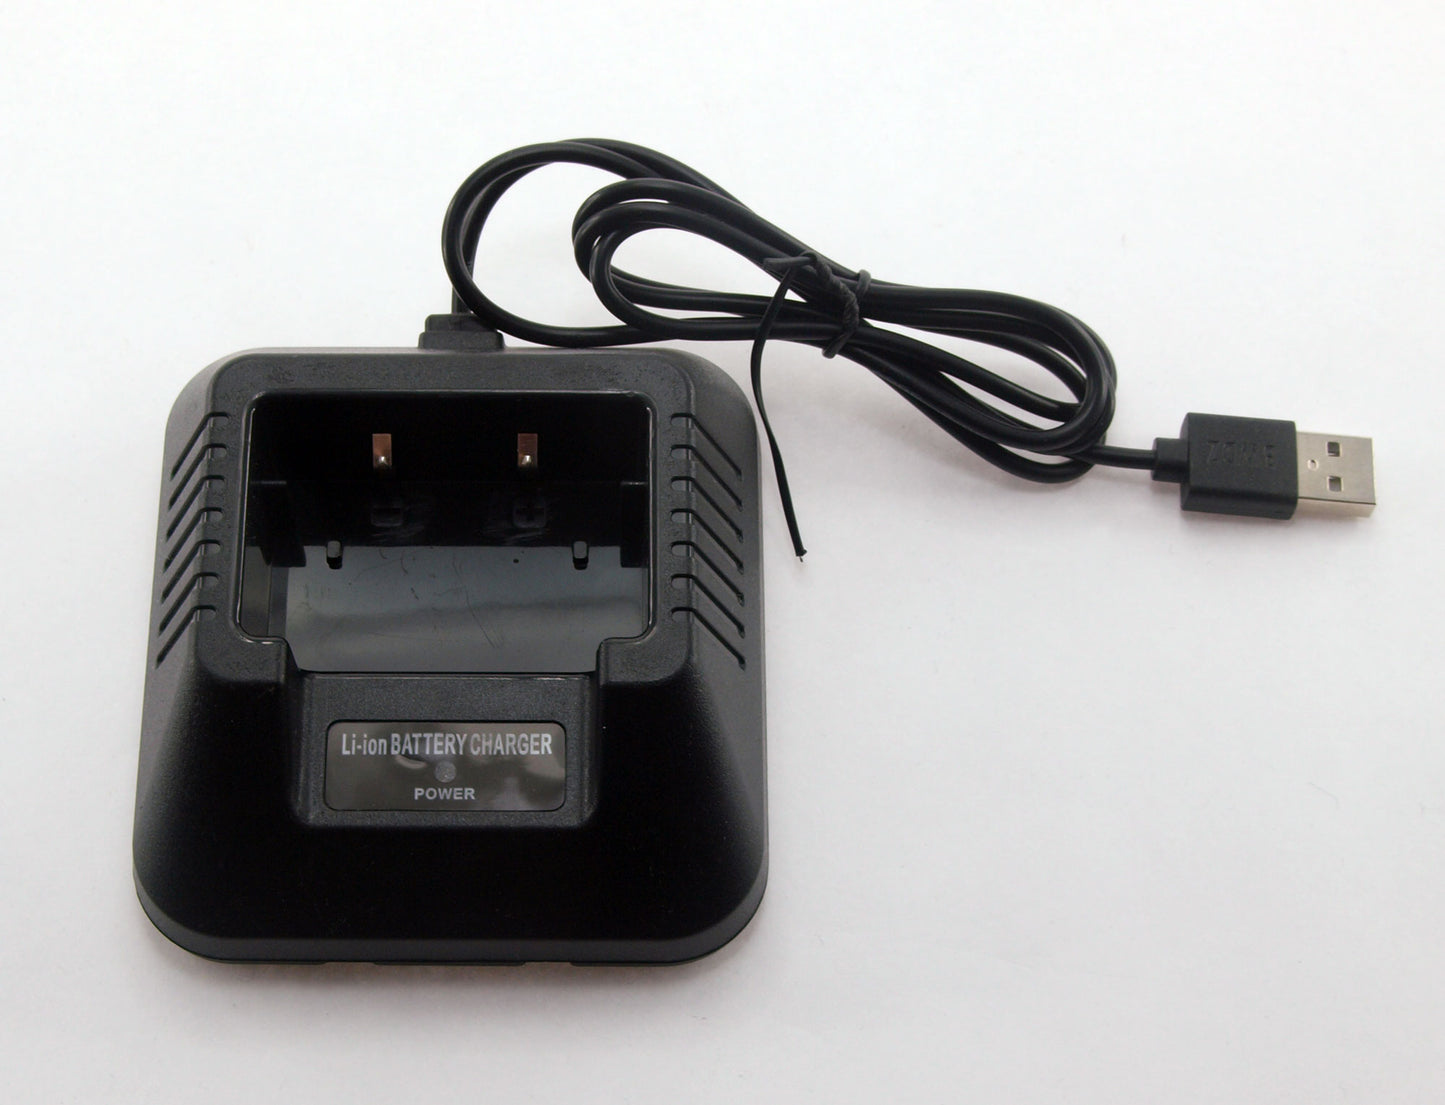 USB powered drop-in charging base for Baofeng UV-5R handheld transceivers